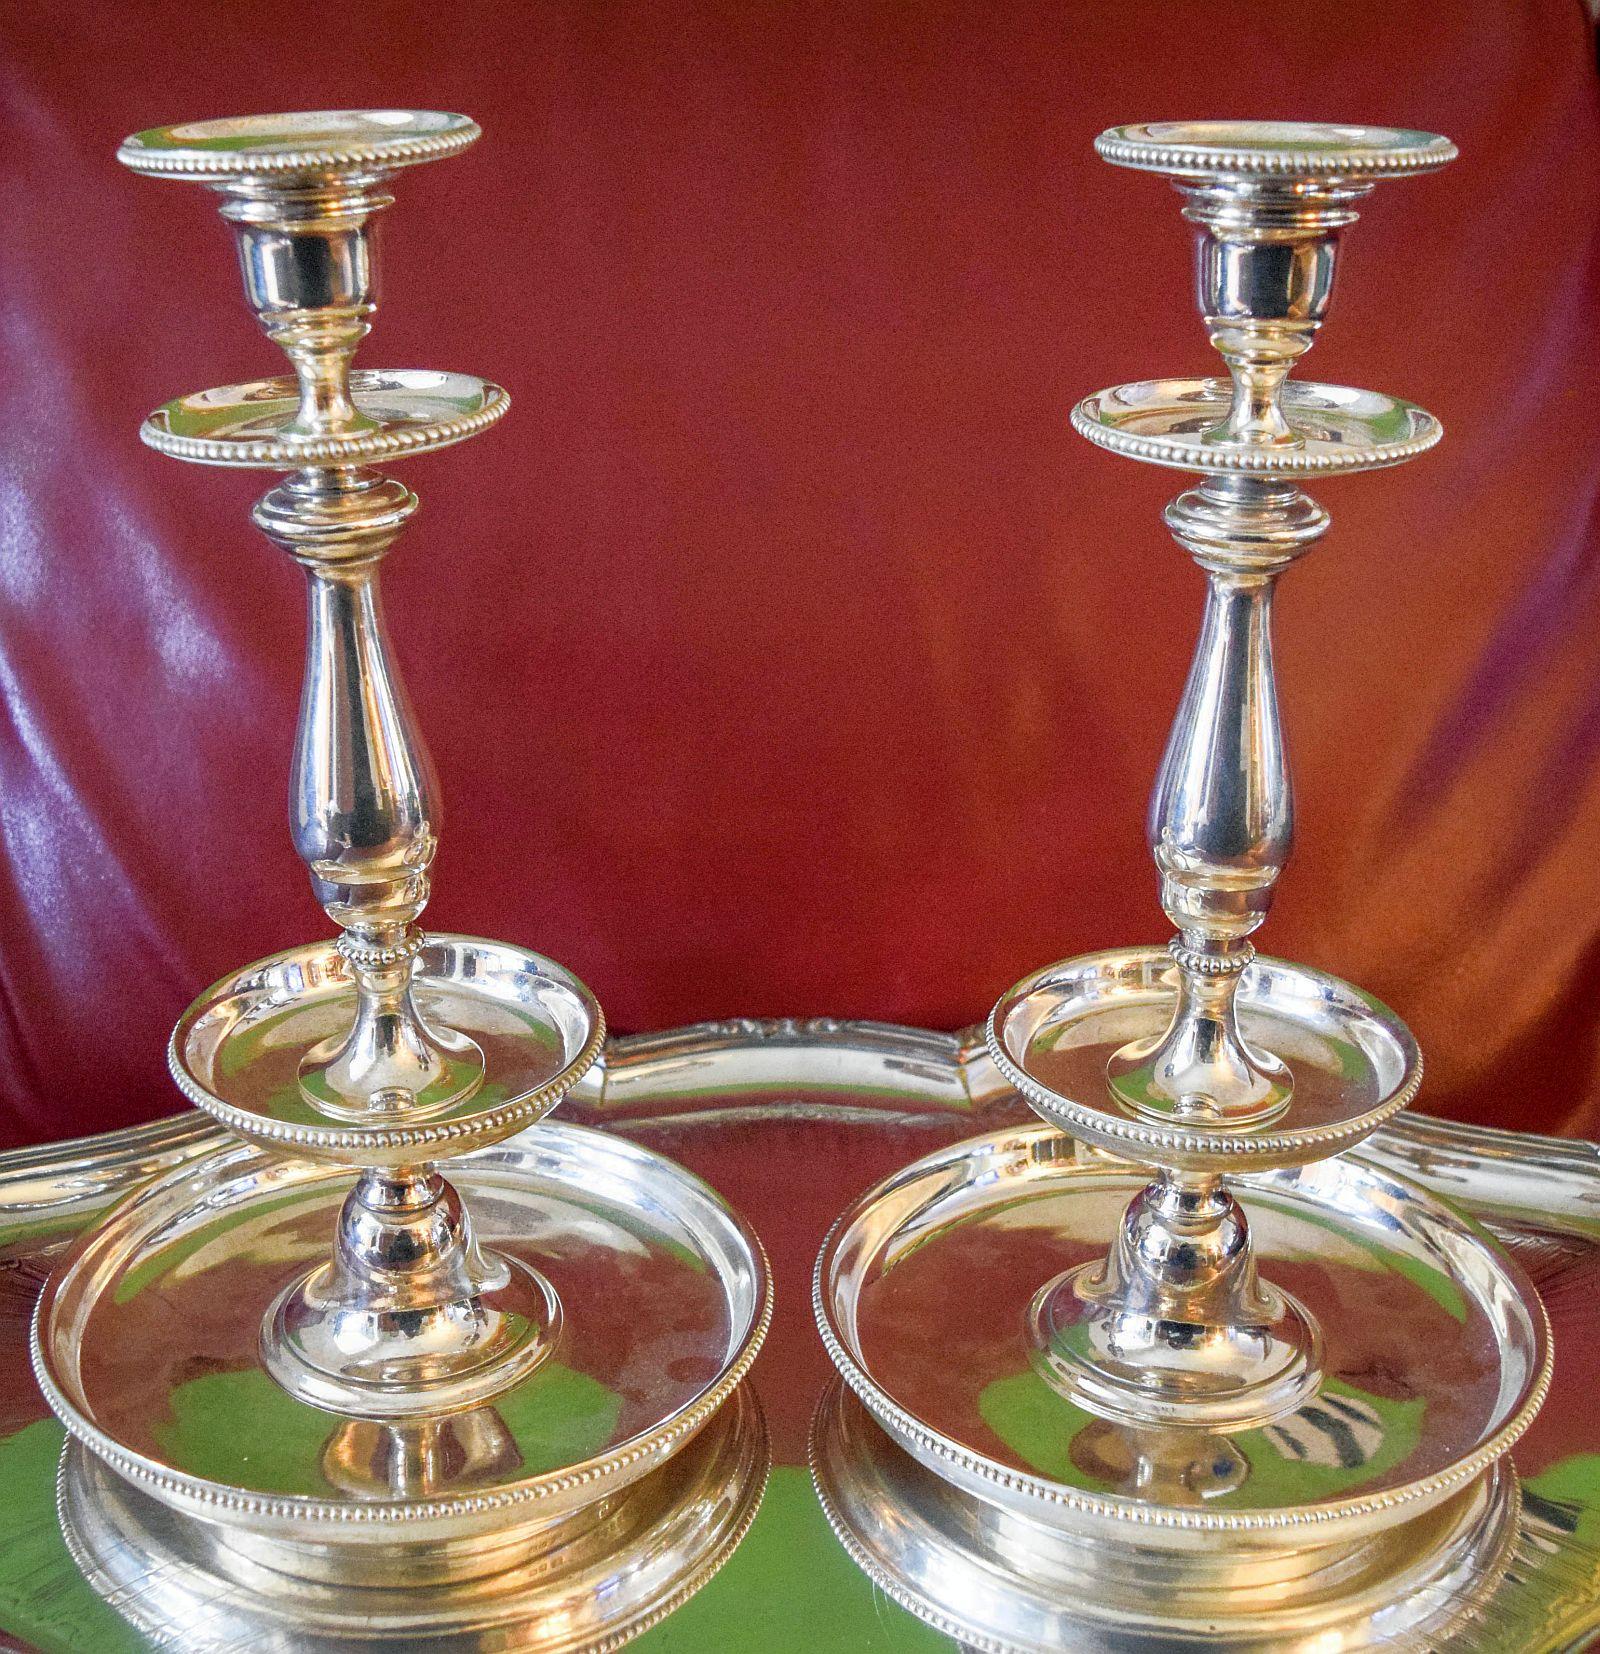 Christofle  A very fine and attractive pair of Antique candle sticks. Silver plate

This extremely rare pair of candlesticks are the finest quality of Christofle.
They are in excellent condition,heavy in weight fully signed and stamped